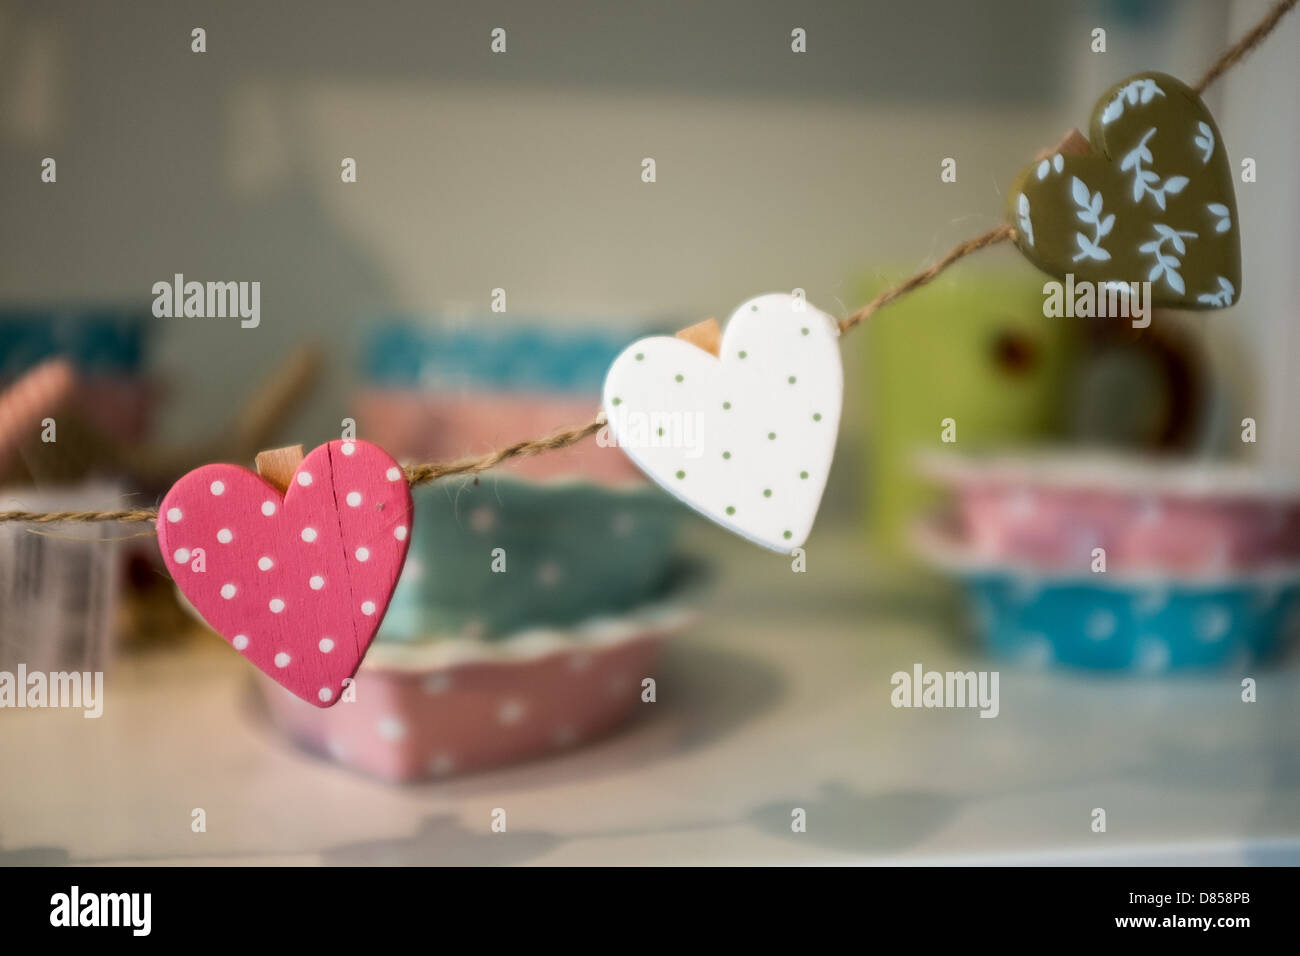 Colourful Wooden Hearts Display Stock Photo